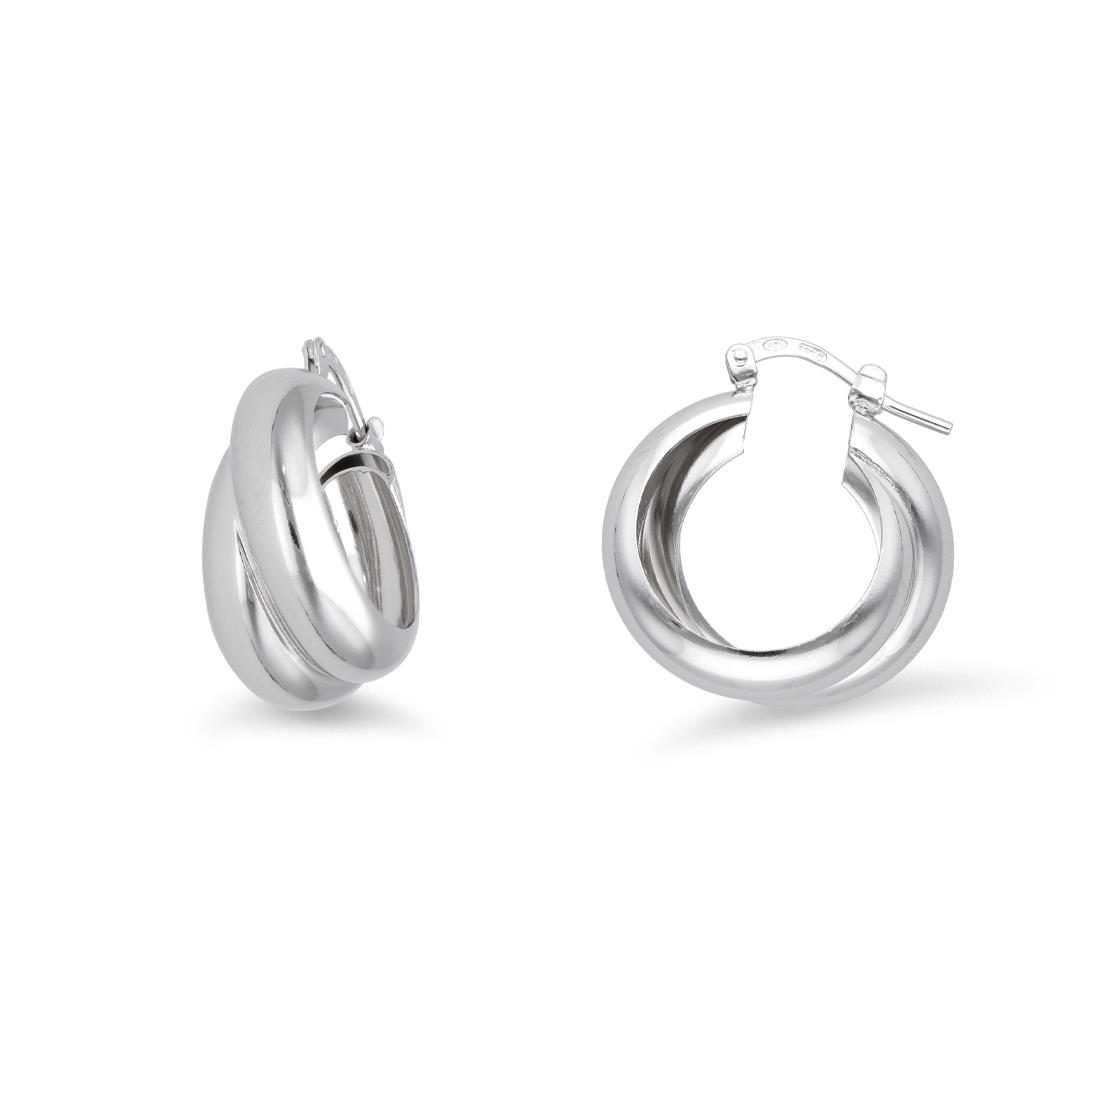 Hula Hoop collection rounded hoop shower earrings in 925 rhodium-plated silver - LUXURY MILANO